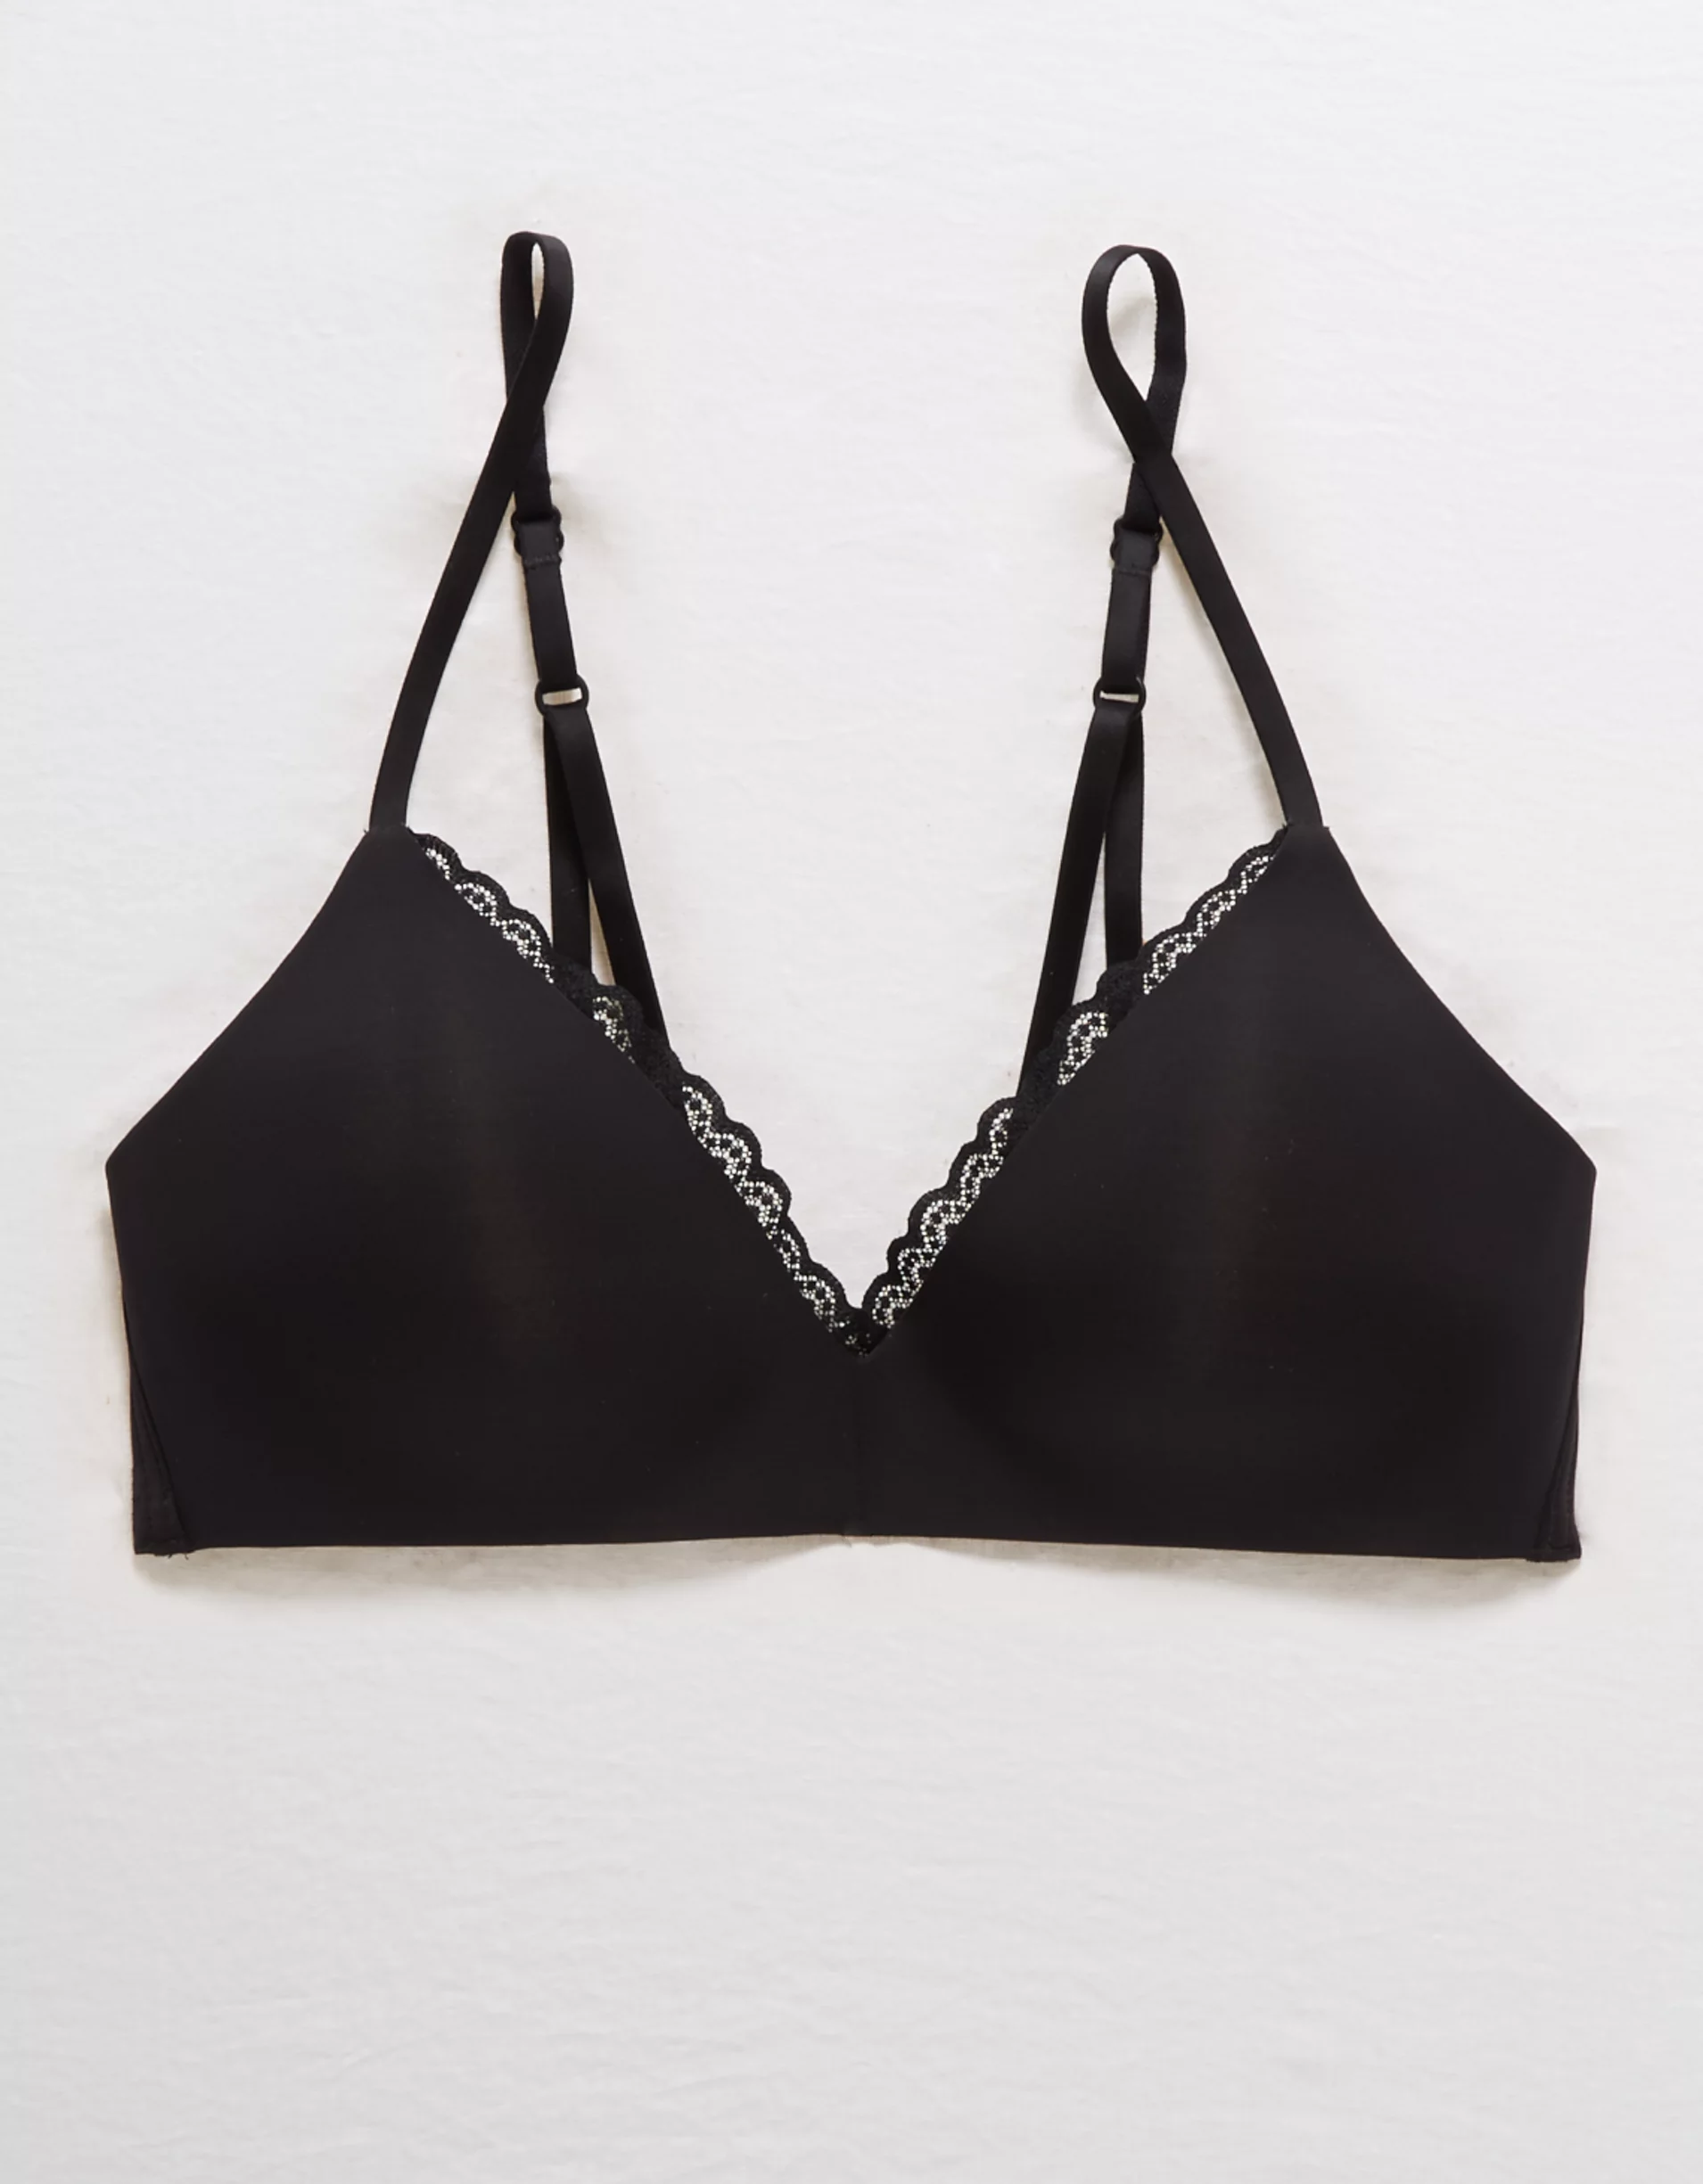 Top 10 tips for buying the perfect bra